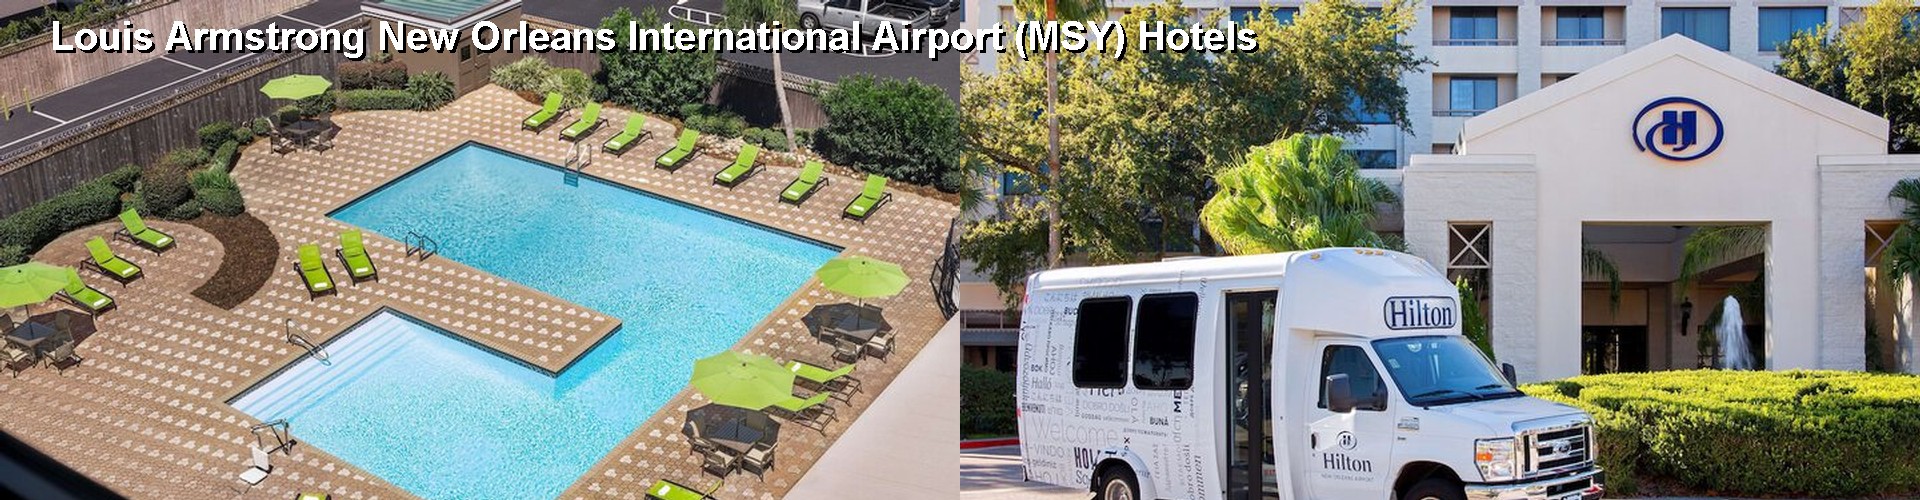 5 Best Hotels near Louis Armstrong New Orleans International Airport (MSY)